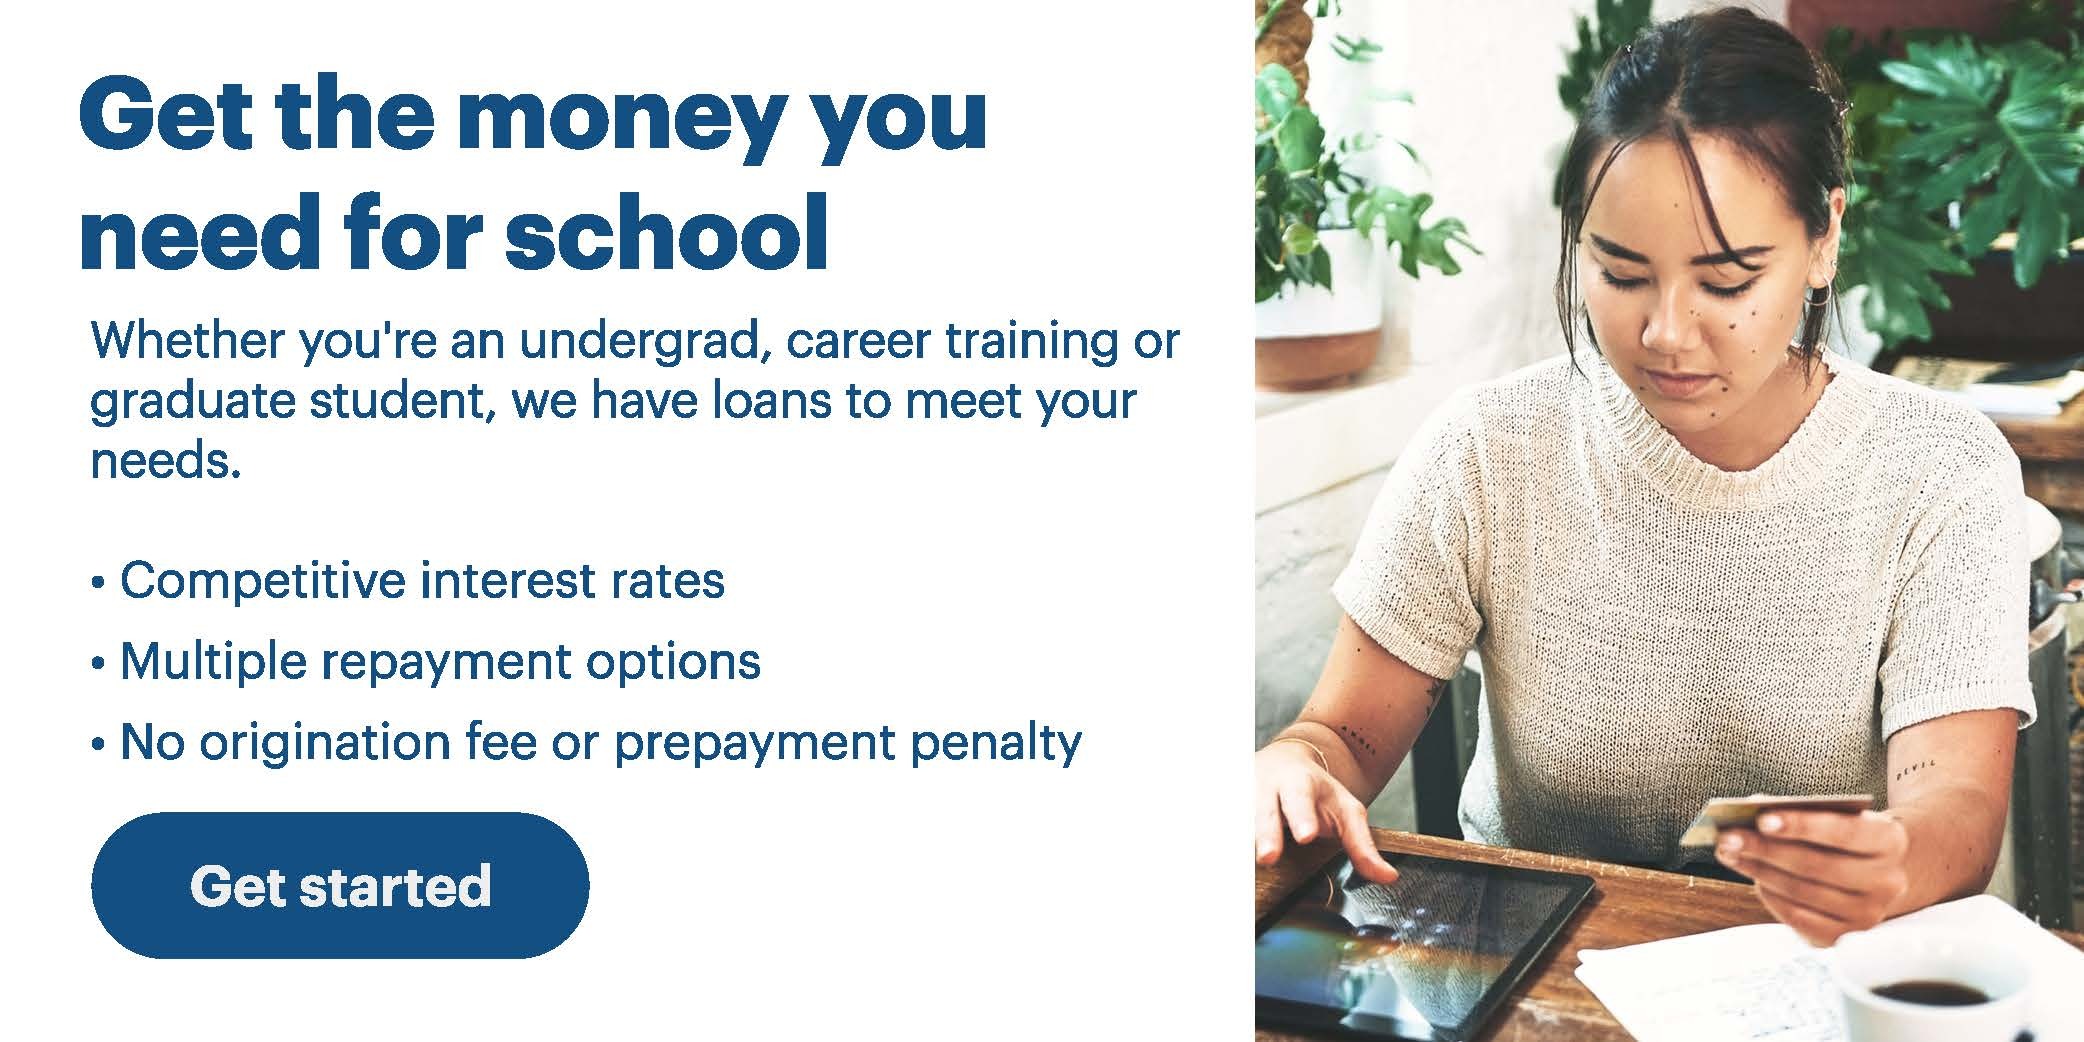 Middlebury Private Student Loans by SallieMae for Middlebury College Students in Middlebury, VT